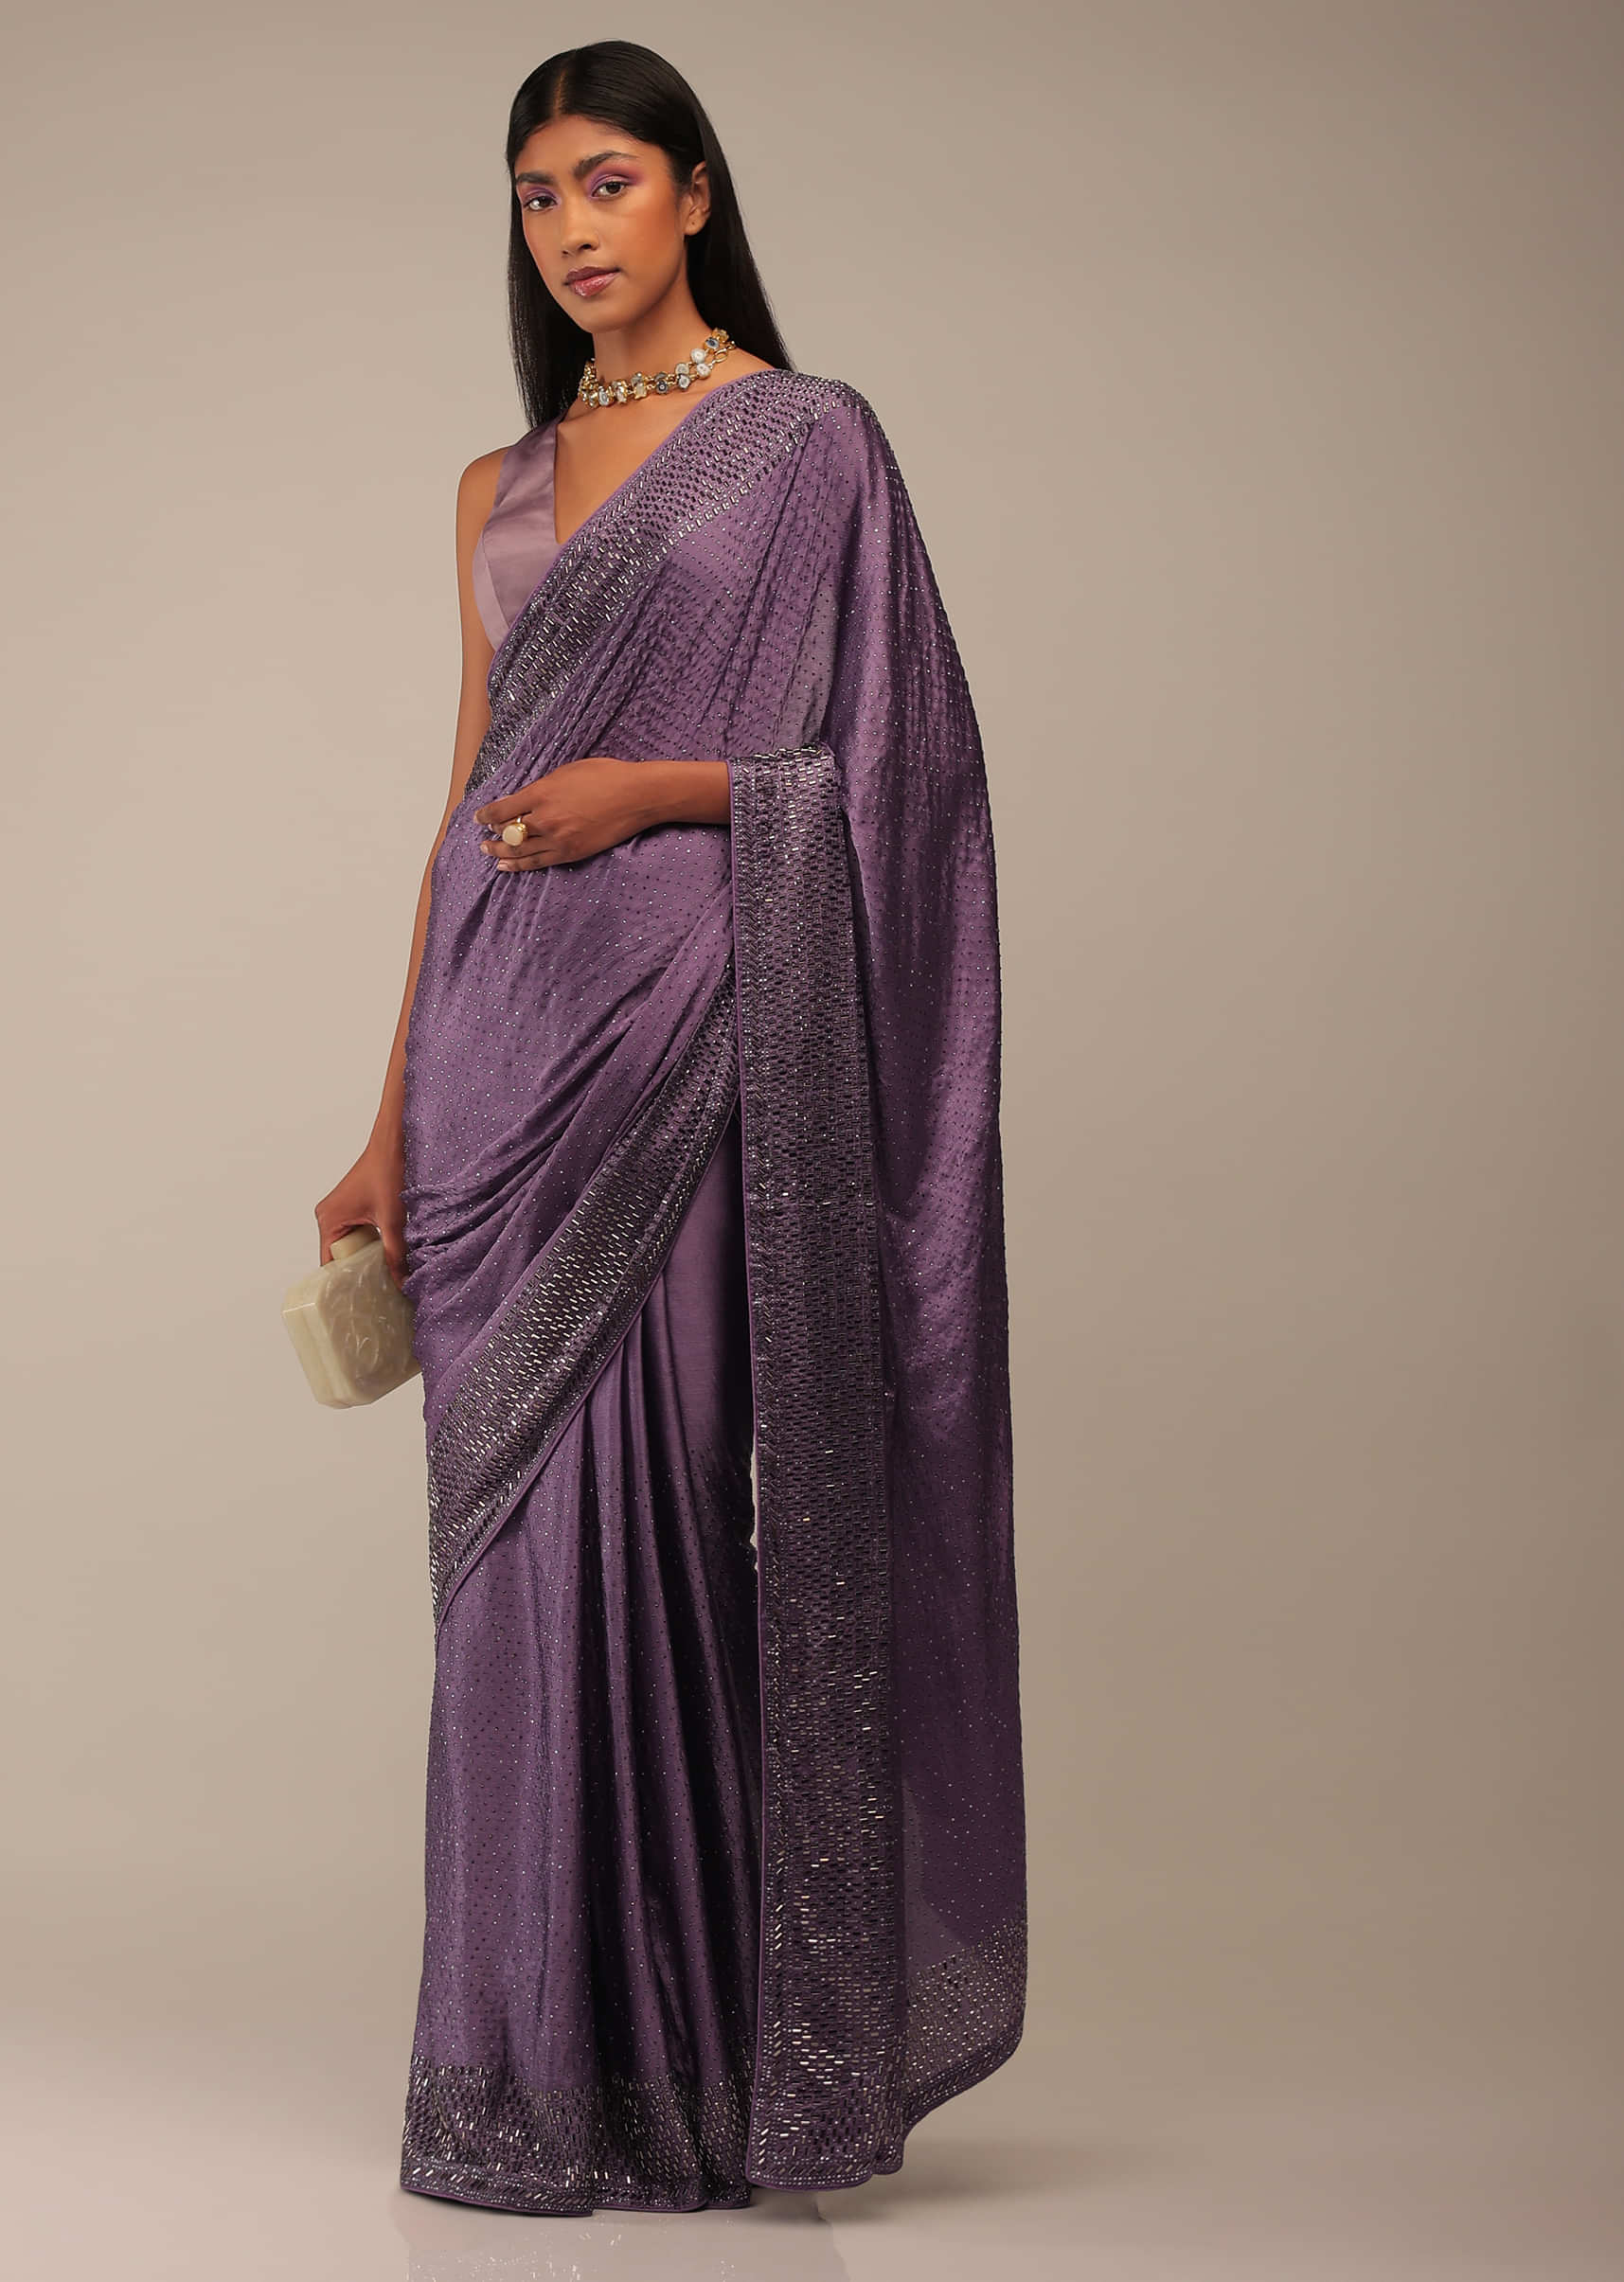 Patrician Purple Saree In Stones Embellishment, Crafted In Chiffon With Scattered Stones